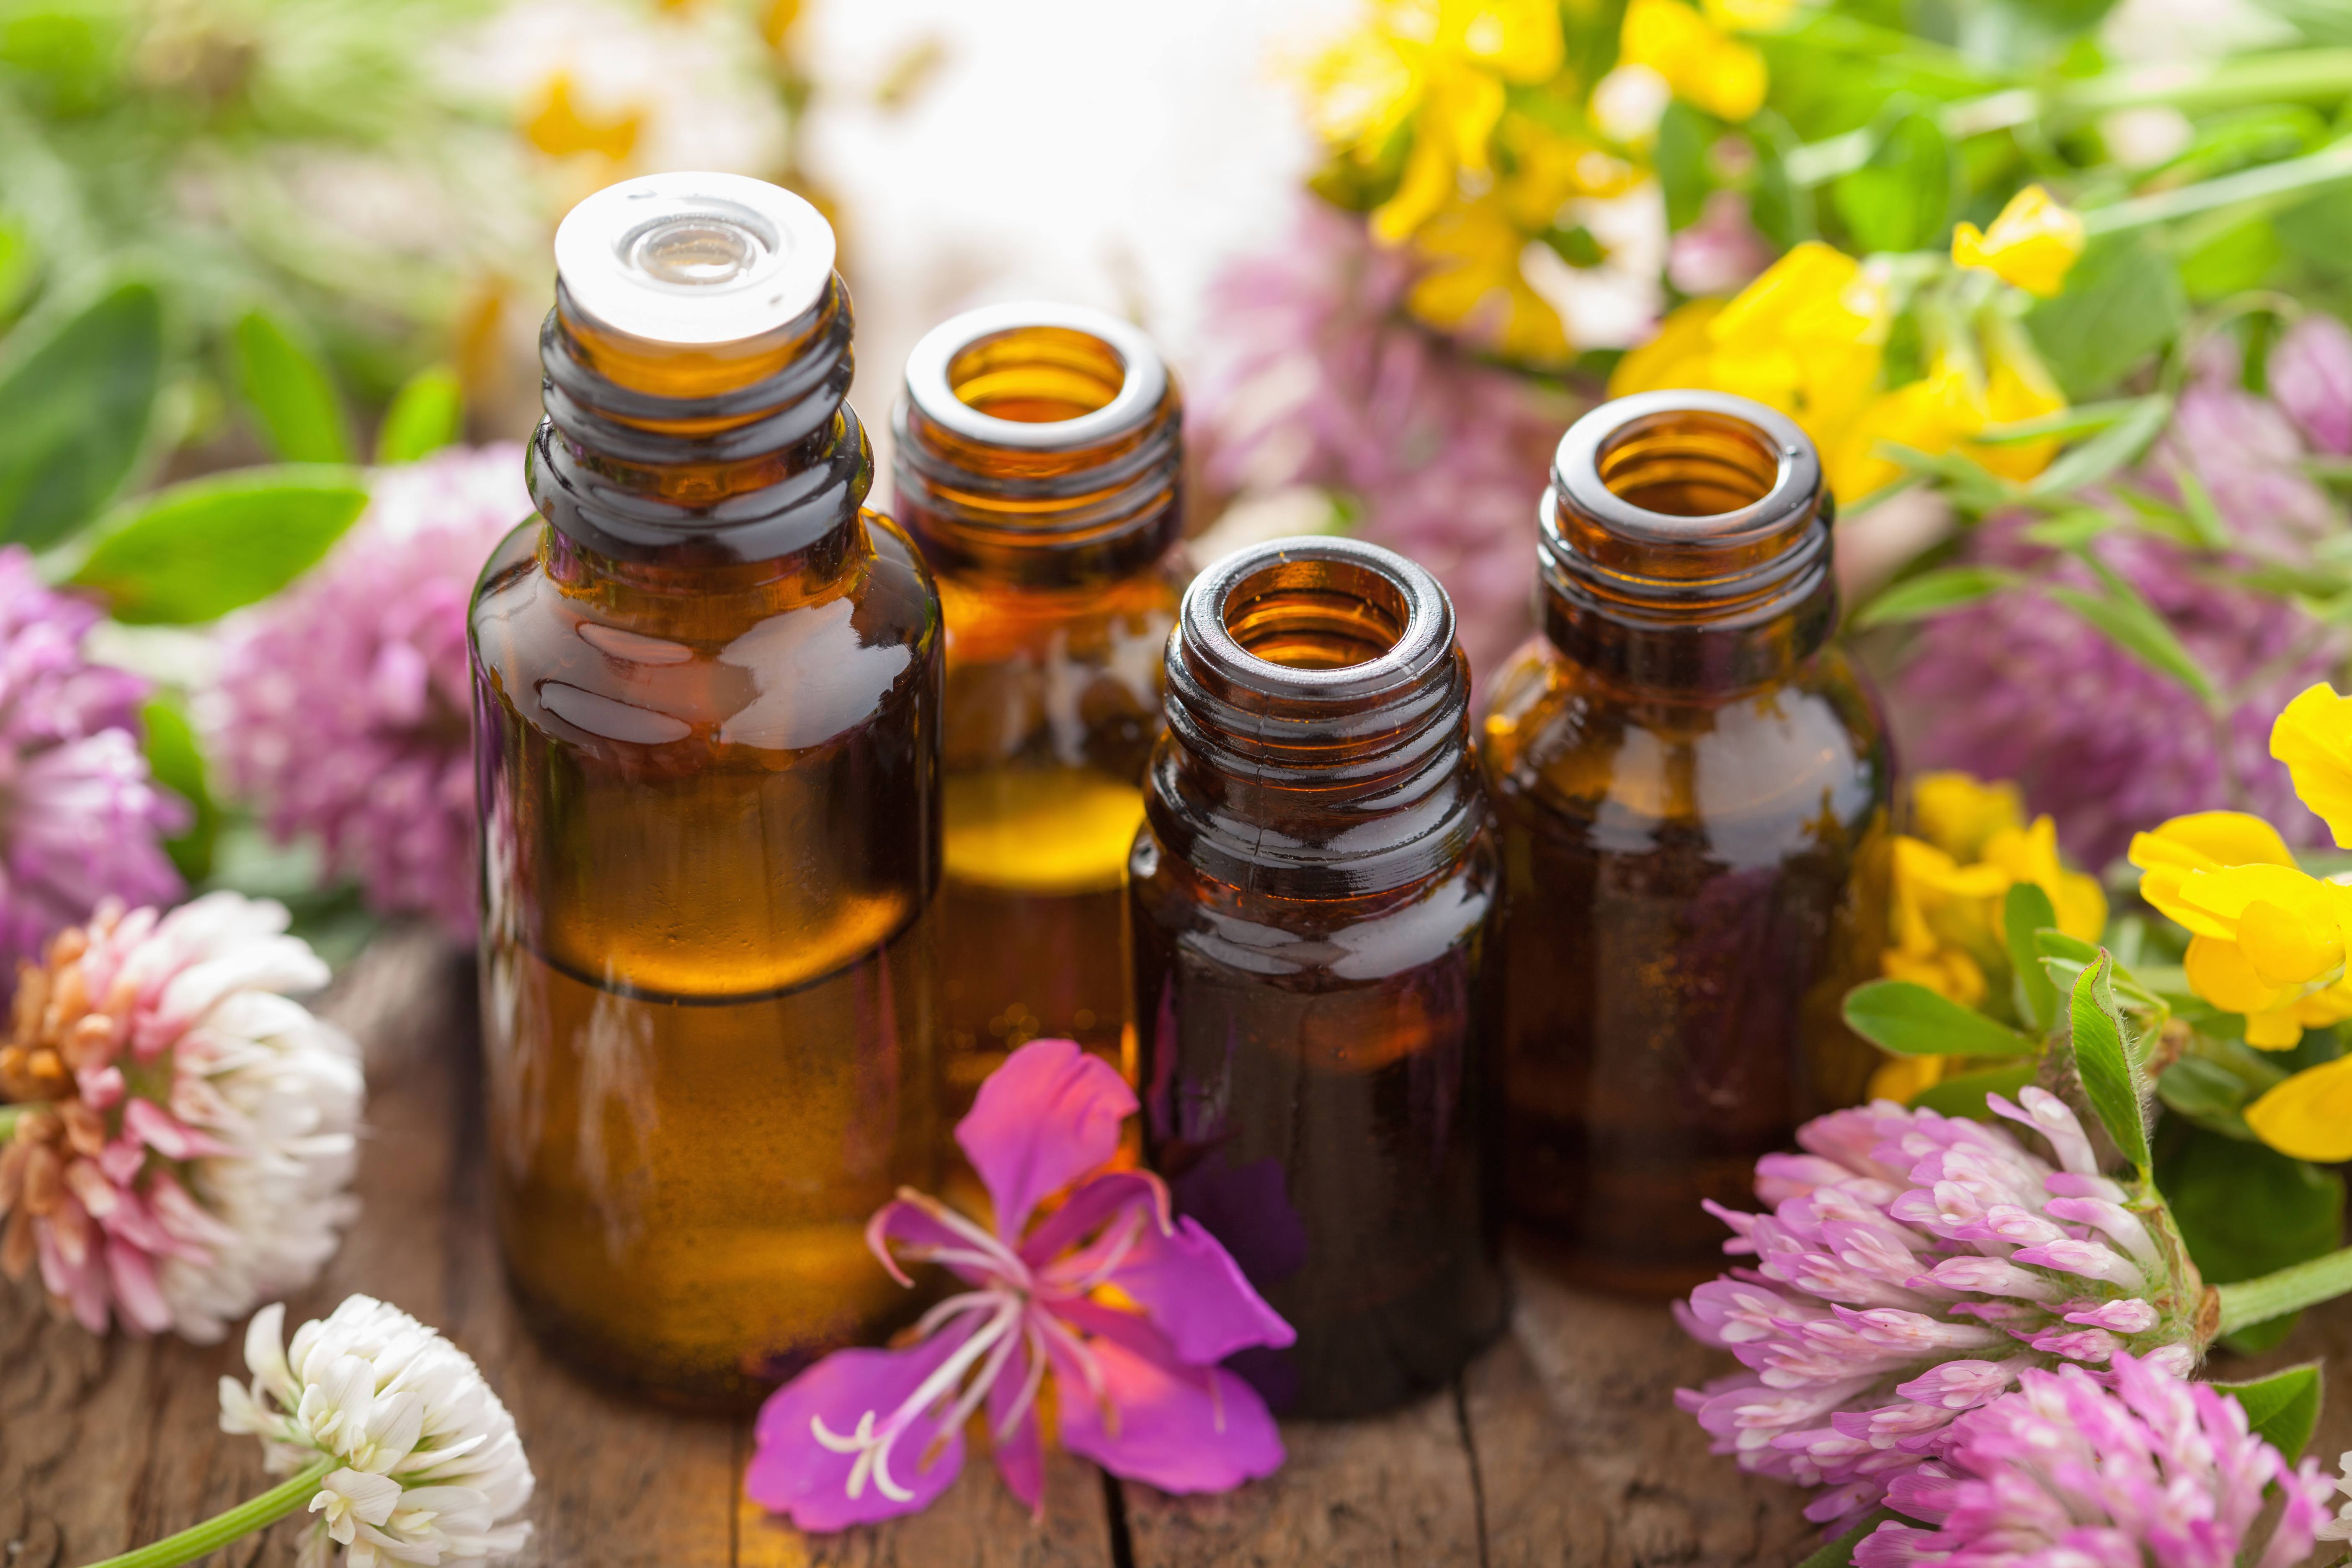 5 Essential Oils Uses That Will Improve Your Health